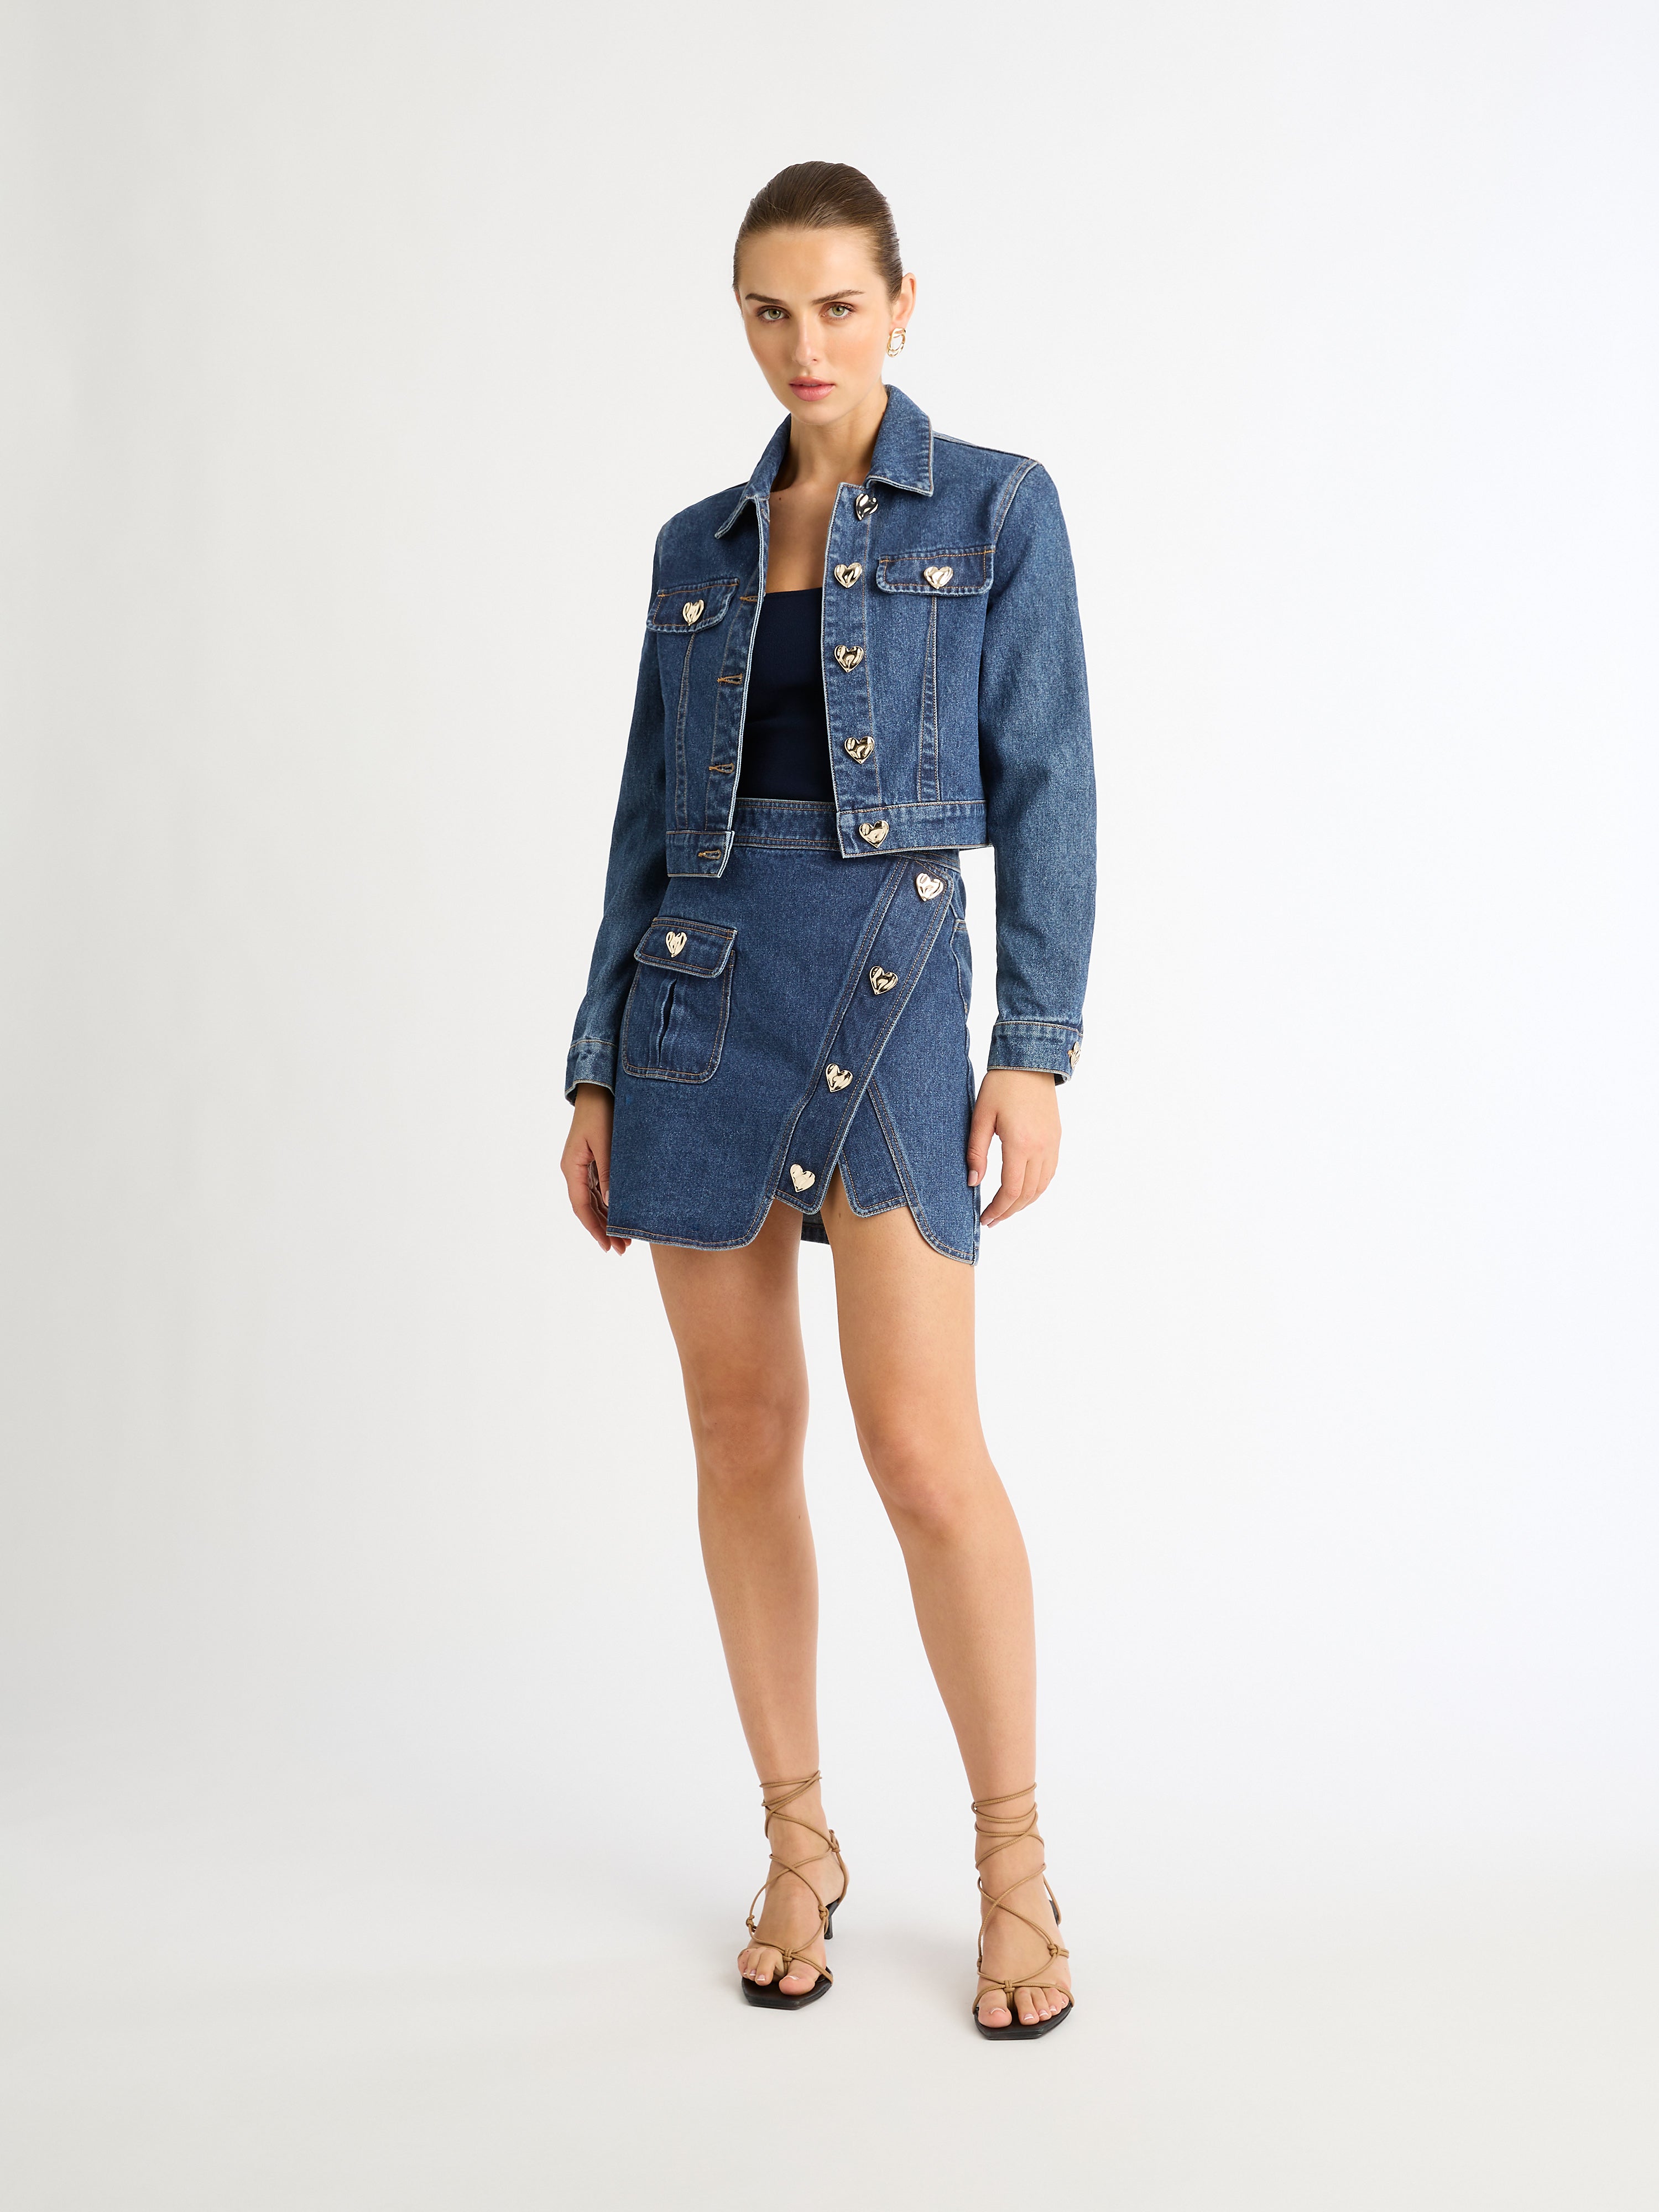 how to style a denim jacket — cerriously